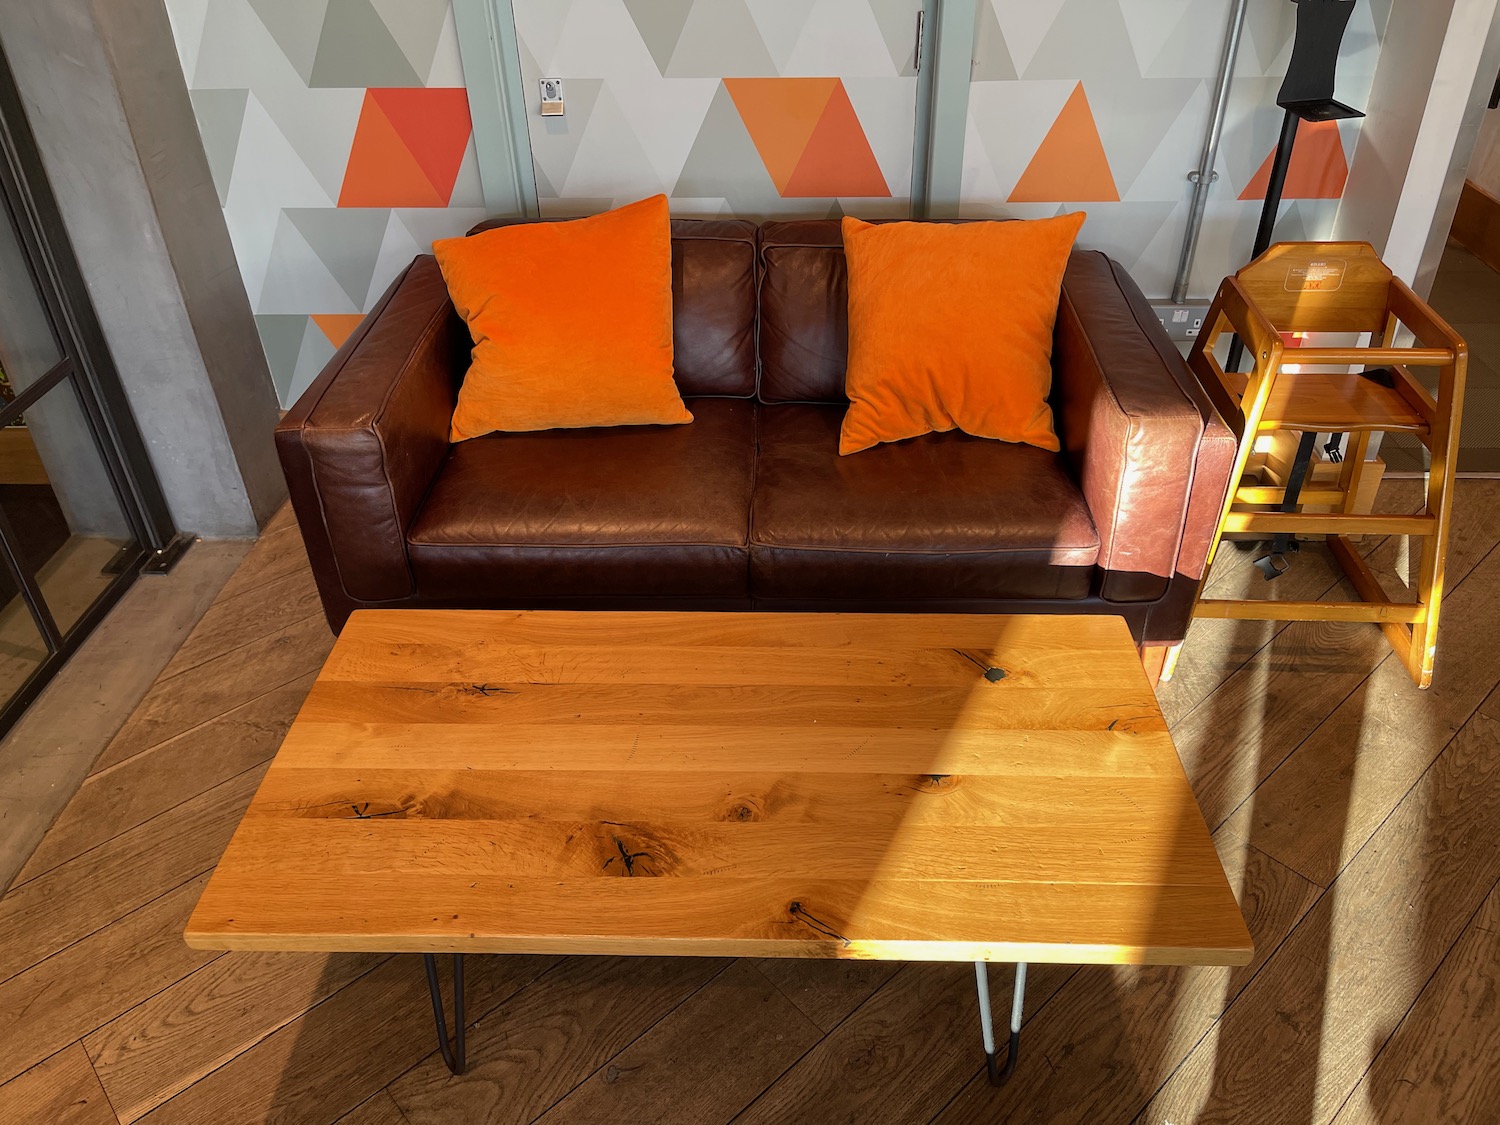 a couch with orange pillows and a wooden table